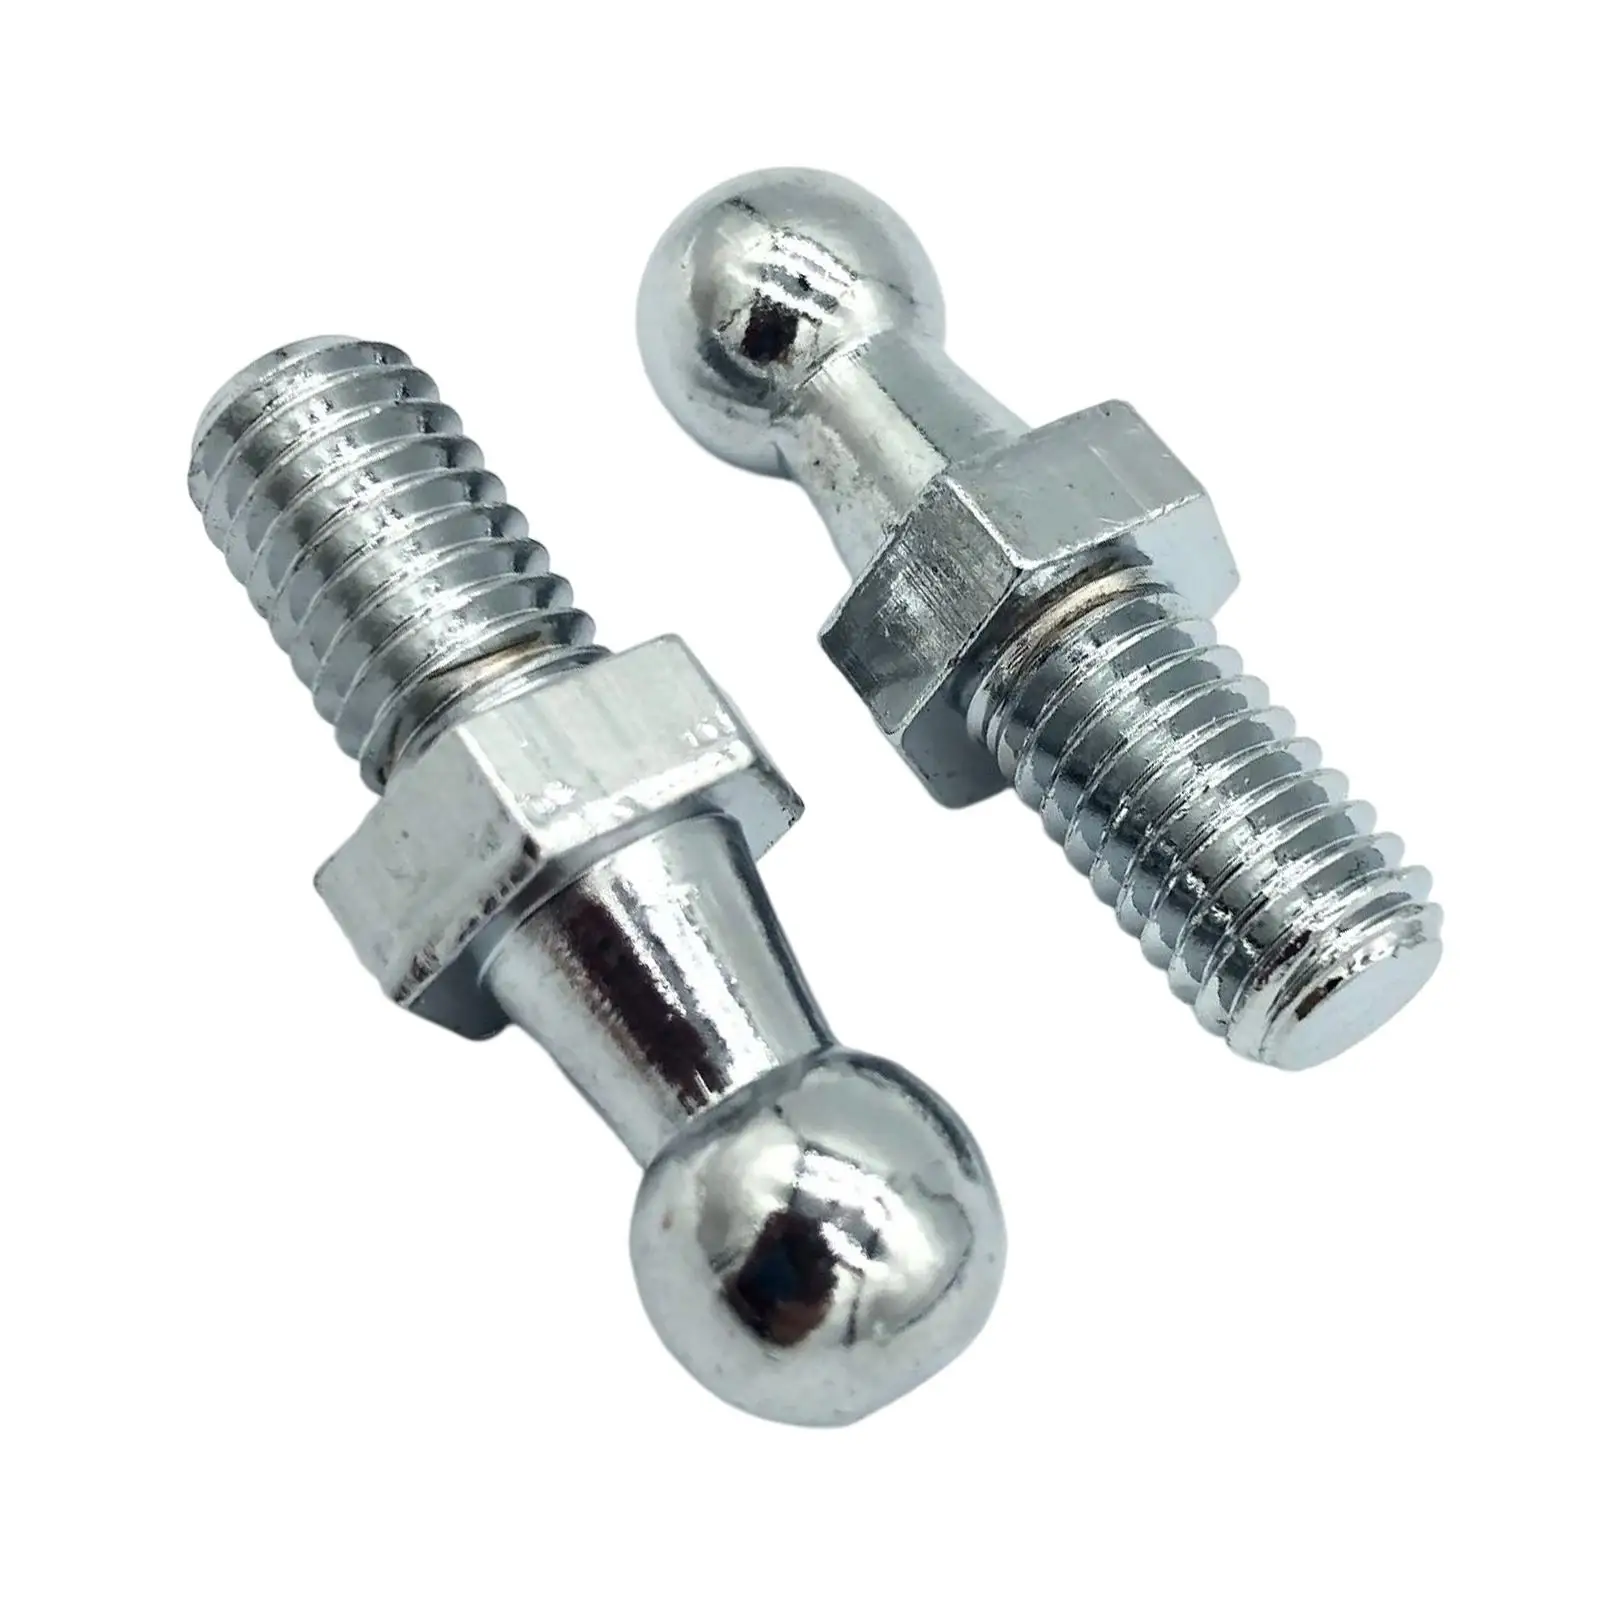 2Pcs Ball Stud Pin Bolt Accessories Replaces Durable 10mm Easy Installation